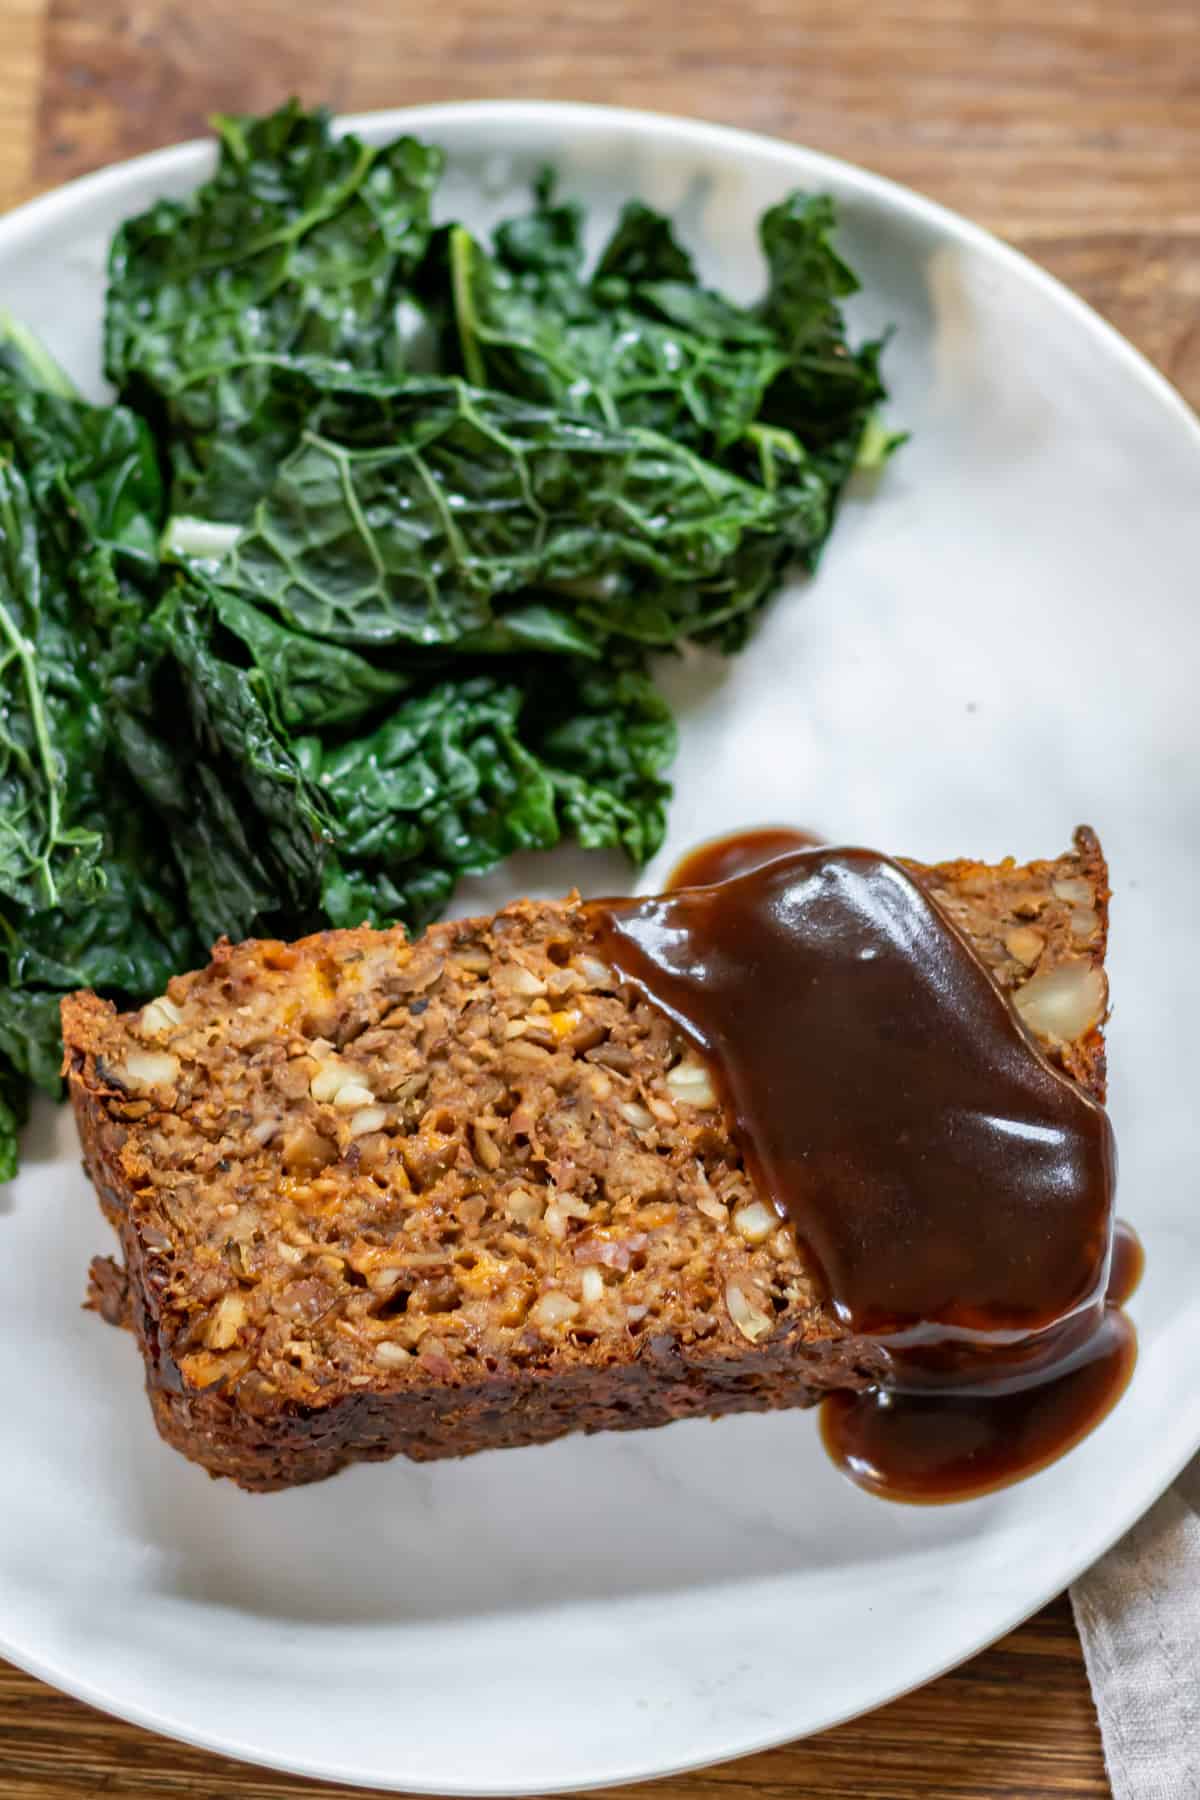 Slice of nut roast on a plate with vegetables and gravy.